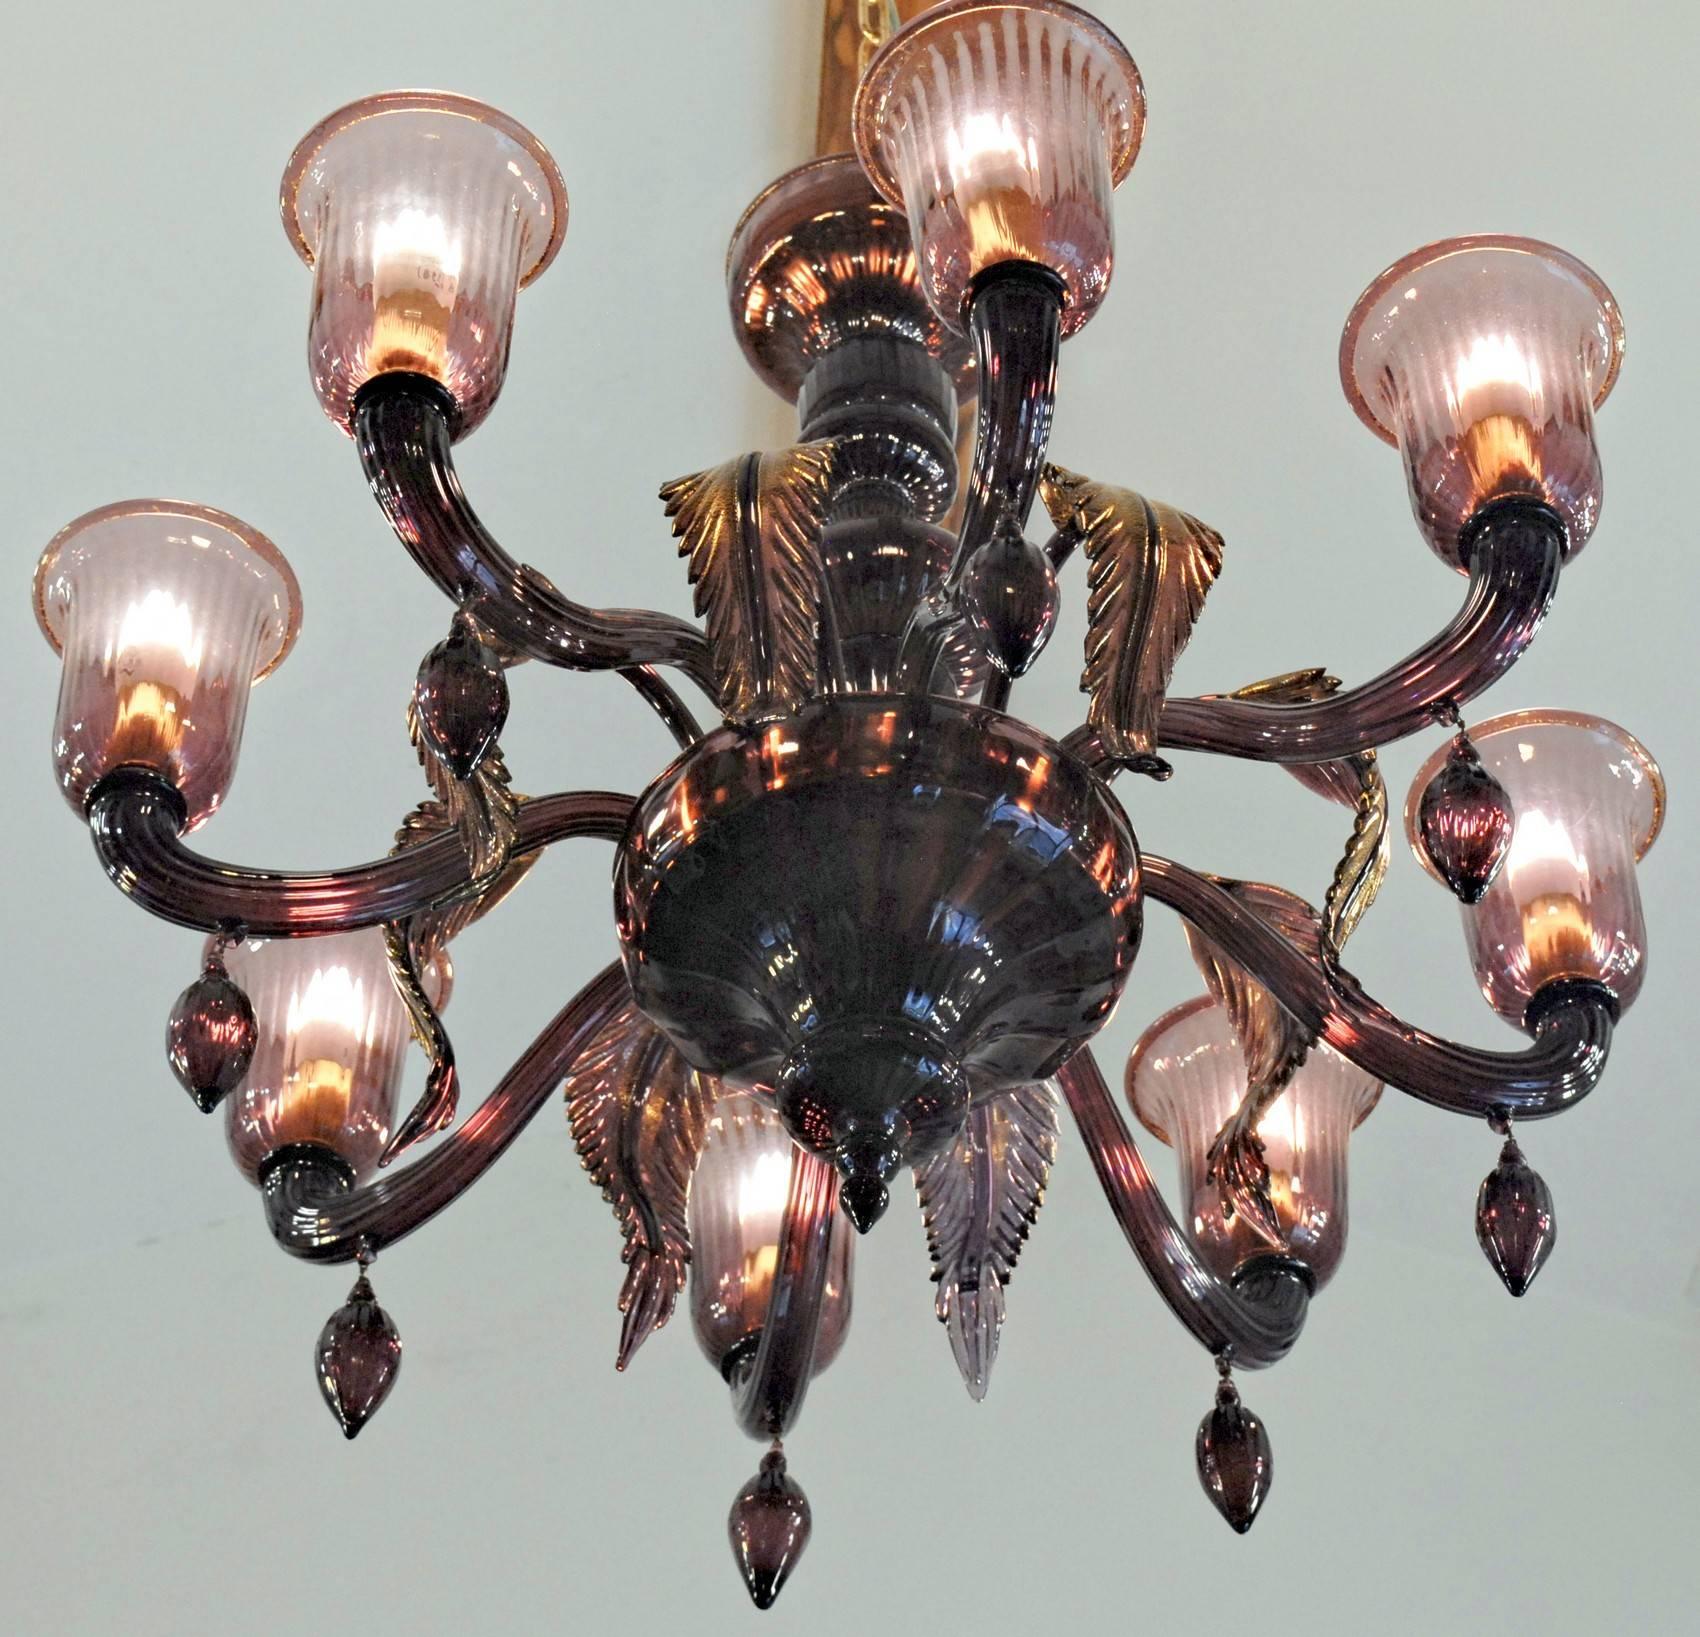 Exquisite Amethyst chandelier. Classic design with a warm version of Amethyst, perhaps coated (mezza tinta) with amber. Eight arms with pendant and rigadin pattern (ribbed). Each arm is spaced by hand made leaf with gold leaf application that gets